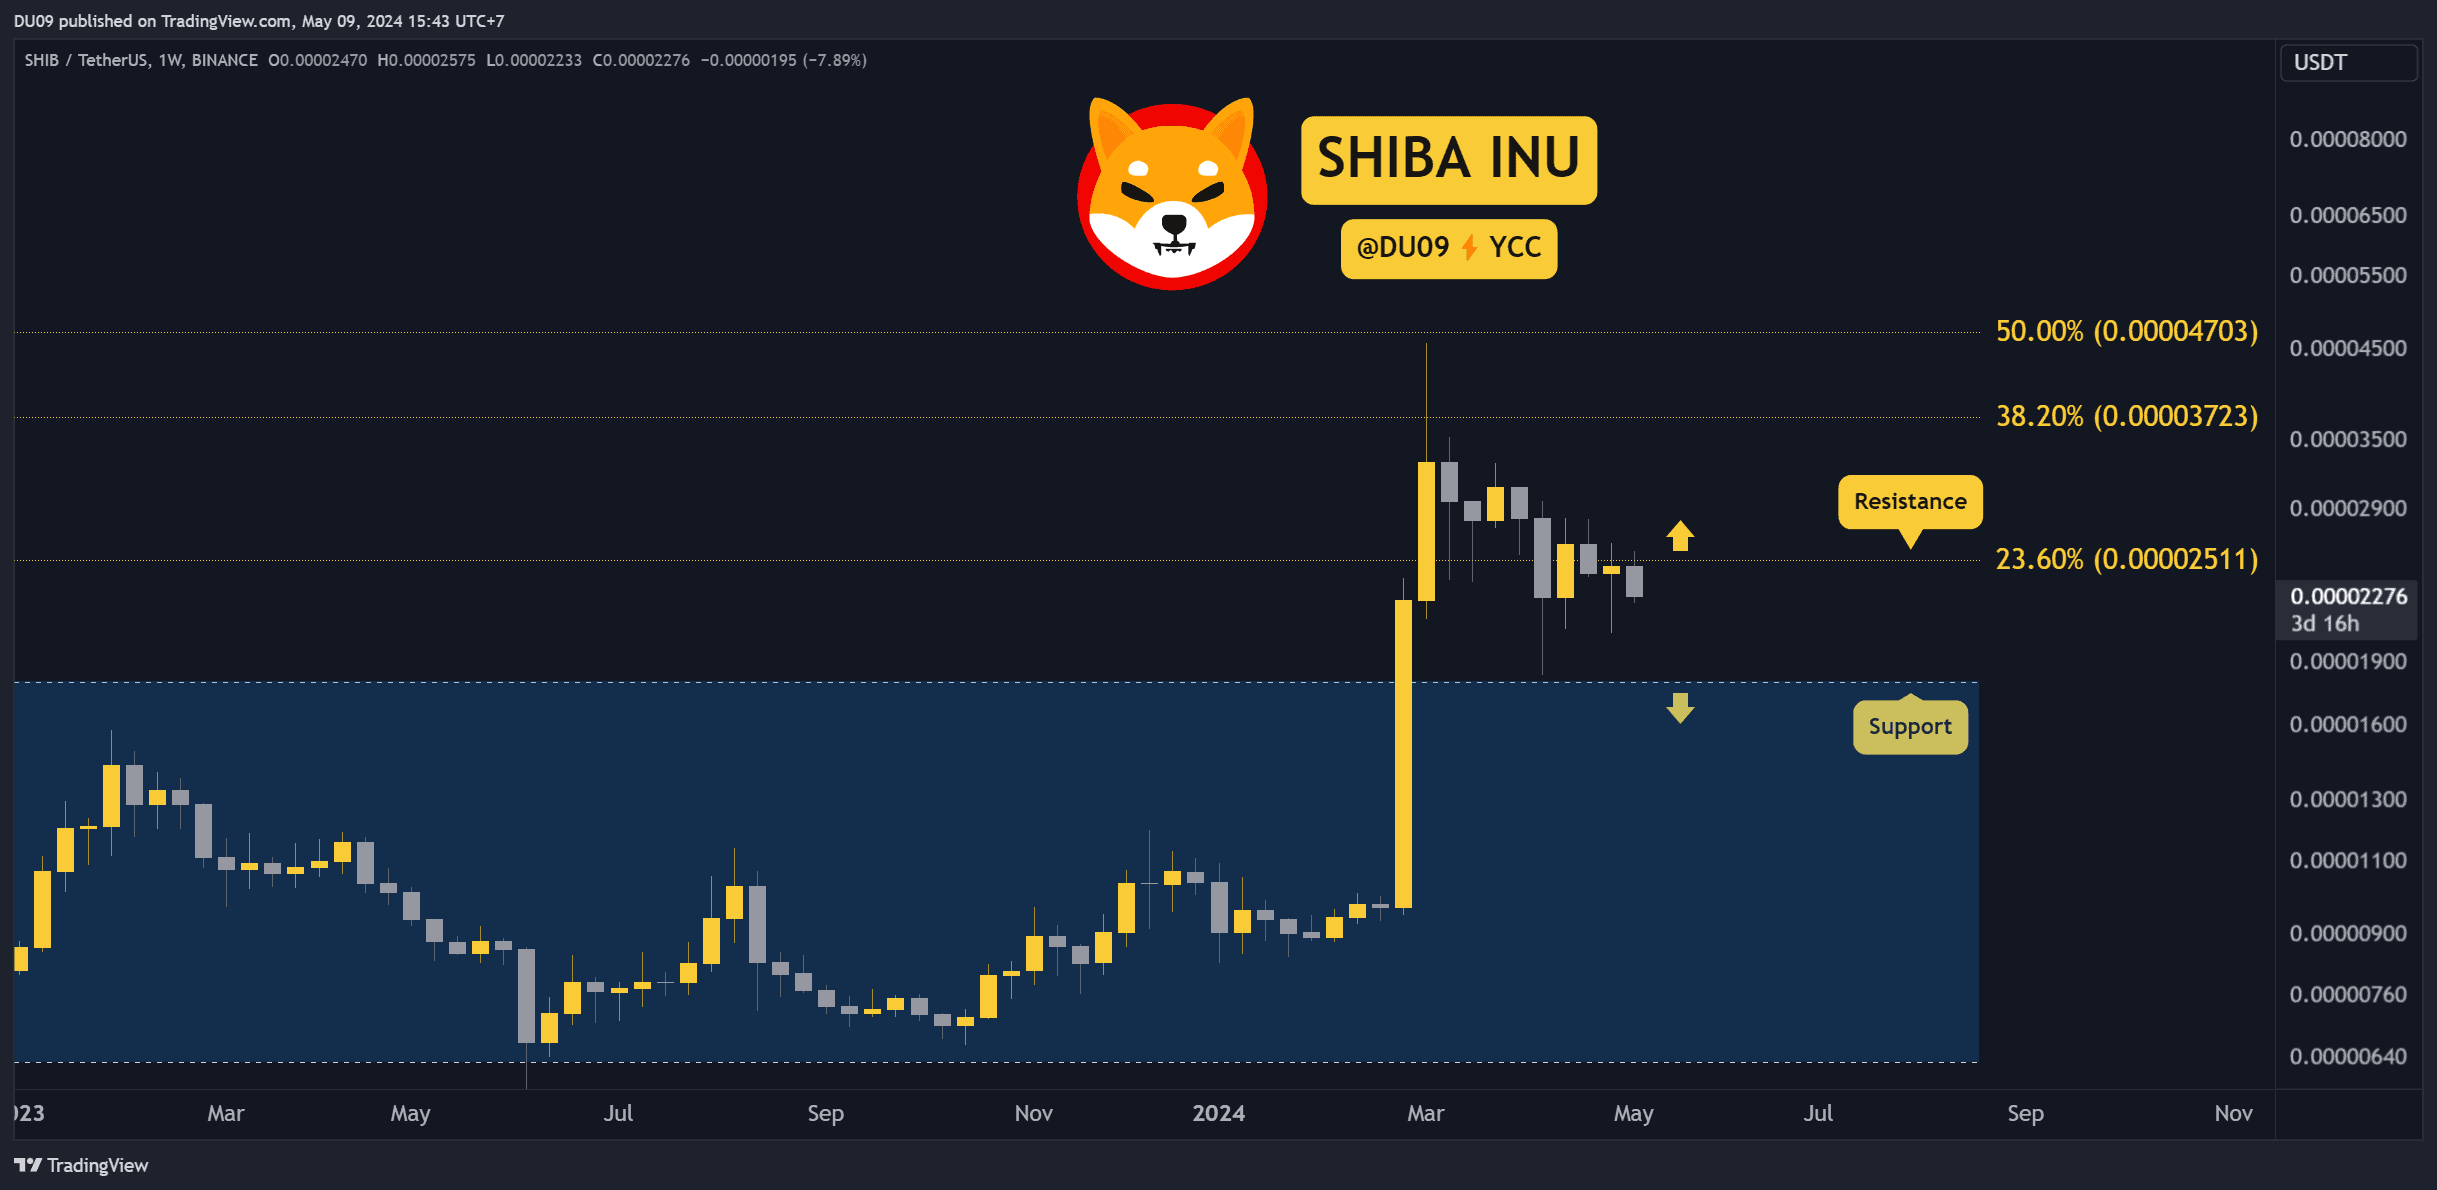 Why-is-the-shiba-inu-(shib)-price-up-this-week?